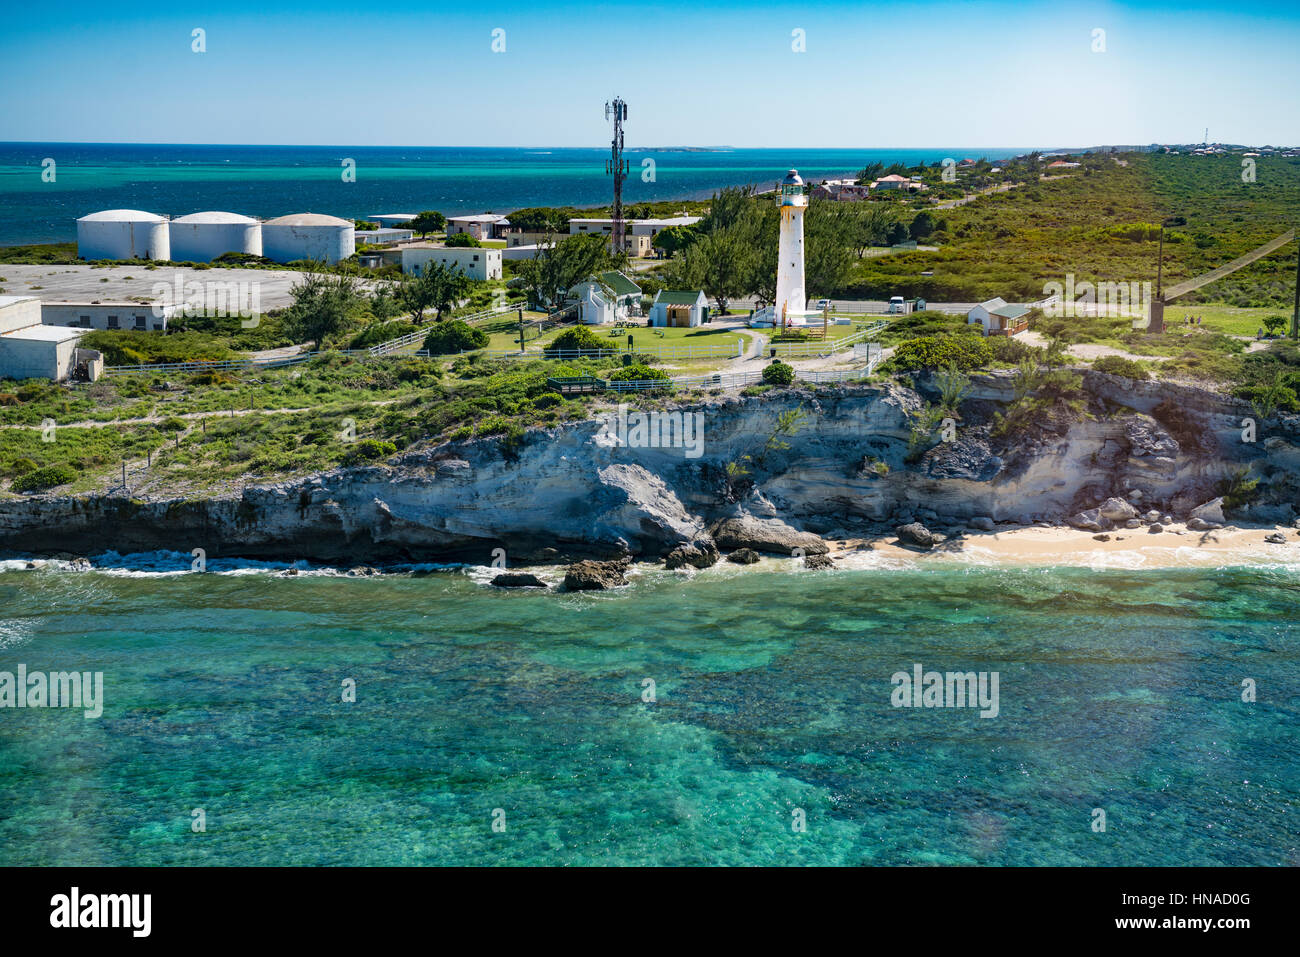 Grand Turk Island  lighthouse and reef, Turks and Caicos Islands, Caribbean Sea, Atlantic Ocean, Largest island reef system in the Carribean Stock Photo